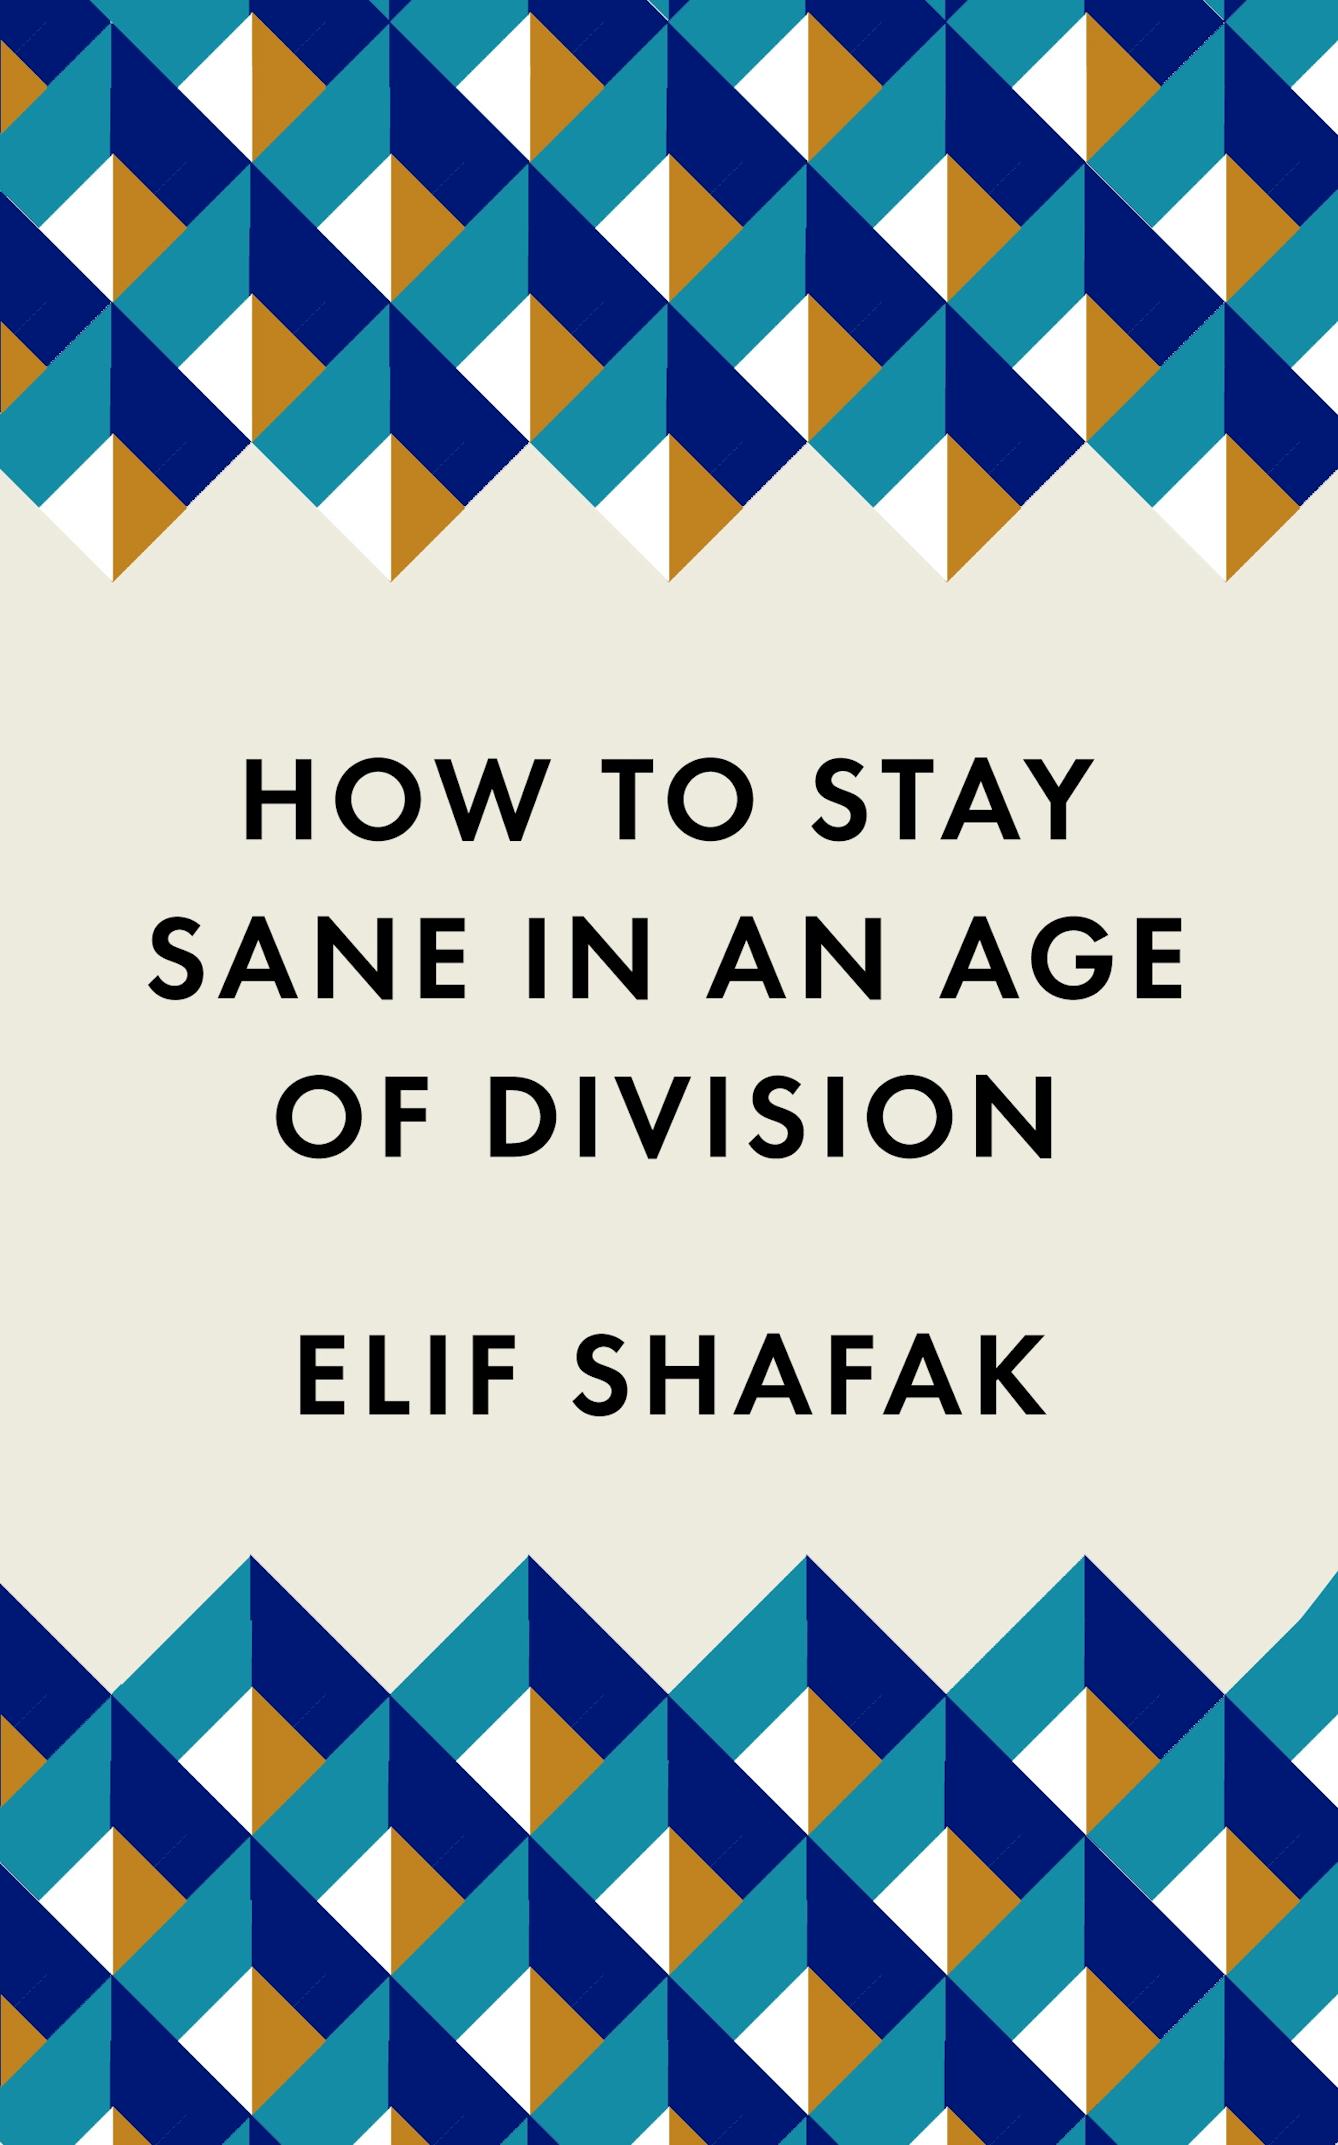 Image of the front cover of a book. The artwork is a graphic pattern of blue, green, orange and white squares and triangles. Black text in capital letters reads: How to Stay Sane in an Age of Division, Elif Shafak.